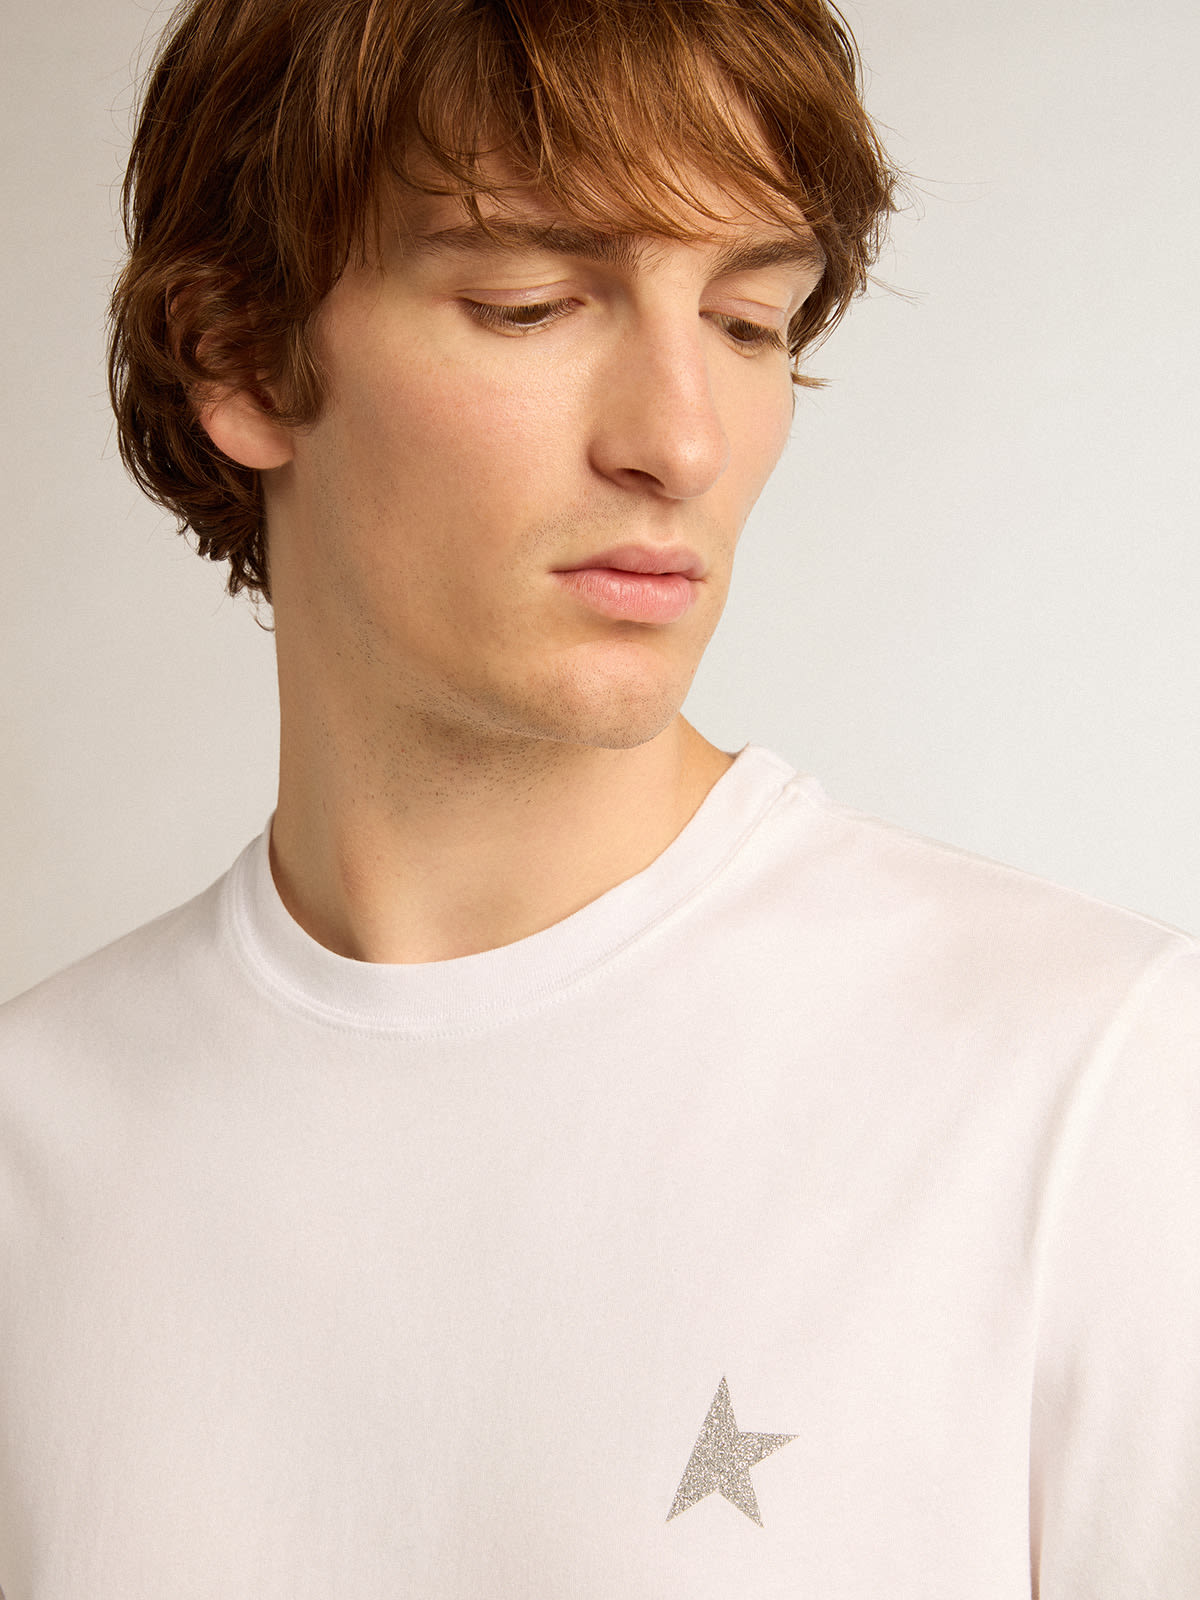 Golden Goose - Men's white T-shirt with silver glitter star on the front in 